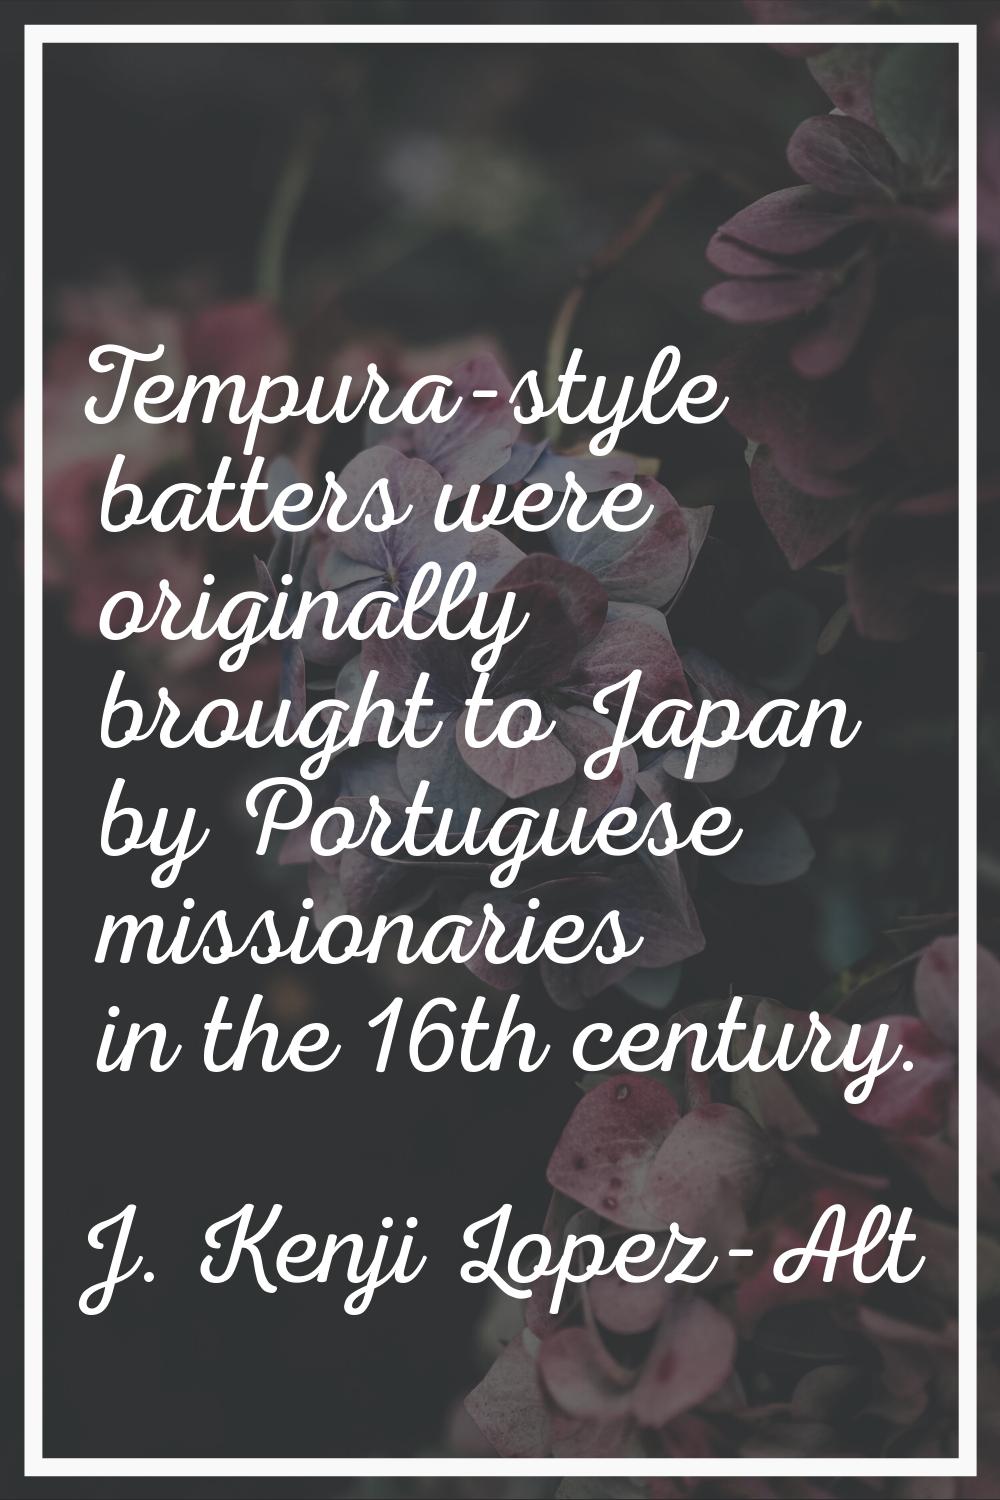 Tempura-style batters were originally brought to Japan by Portuguese missionaries in the 16th centu